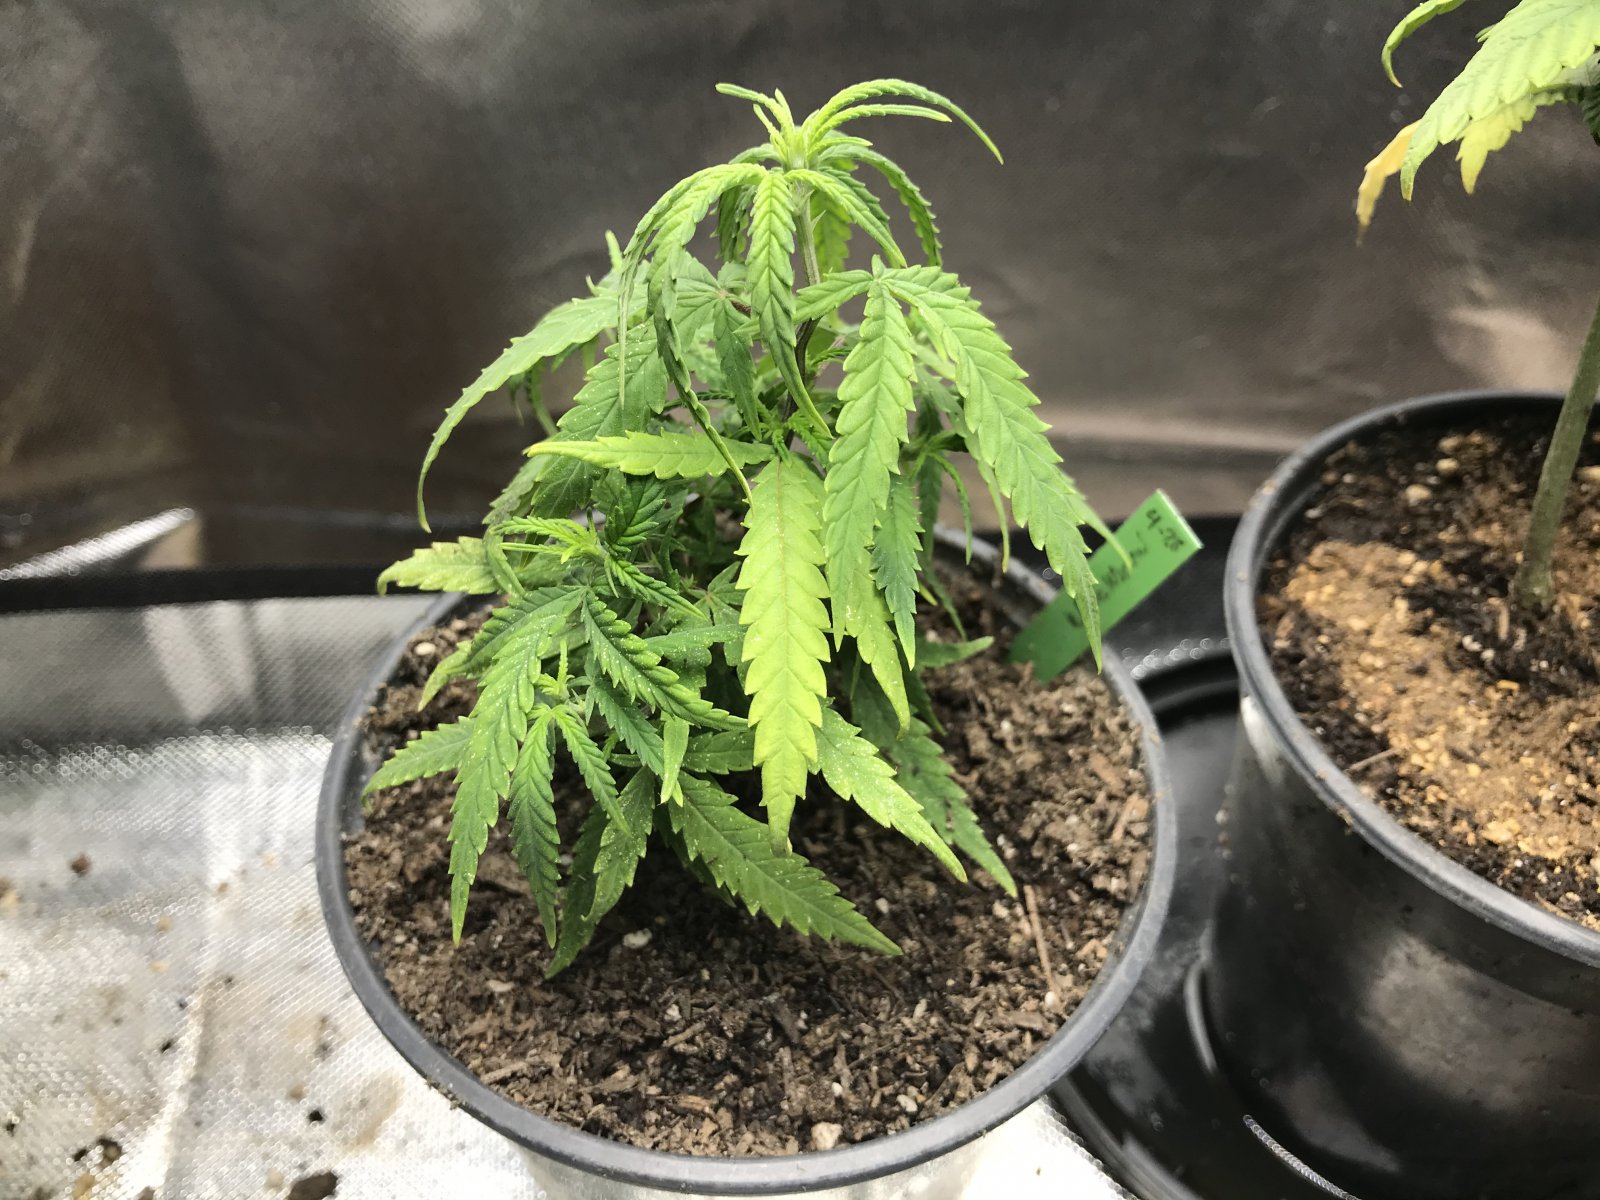 White Widow clone- mom's currently in the do I harvest? stage of growth